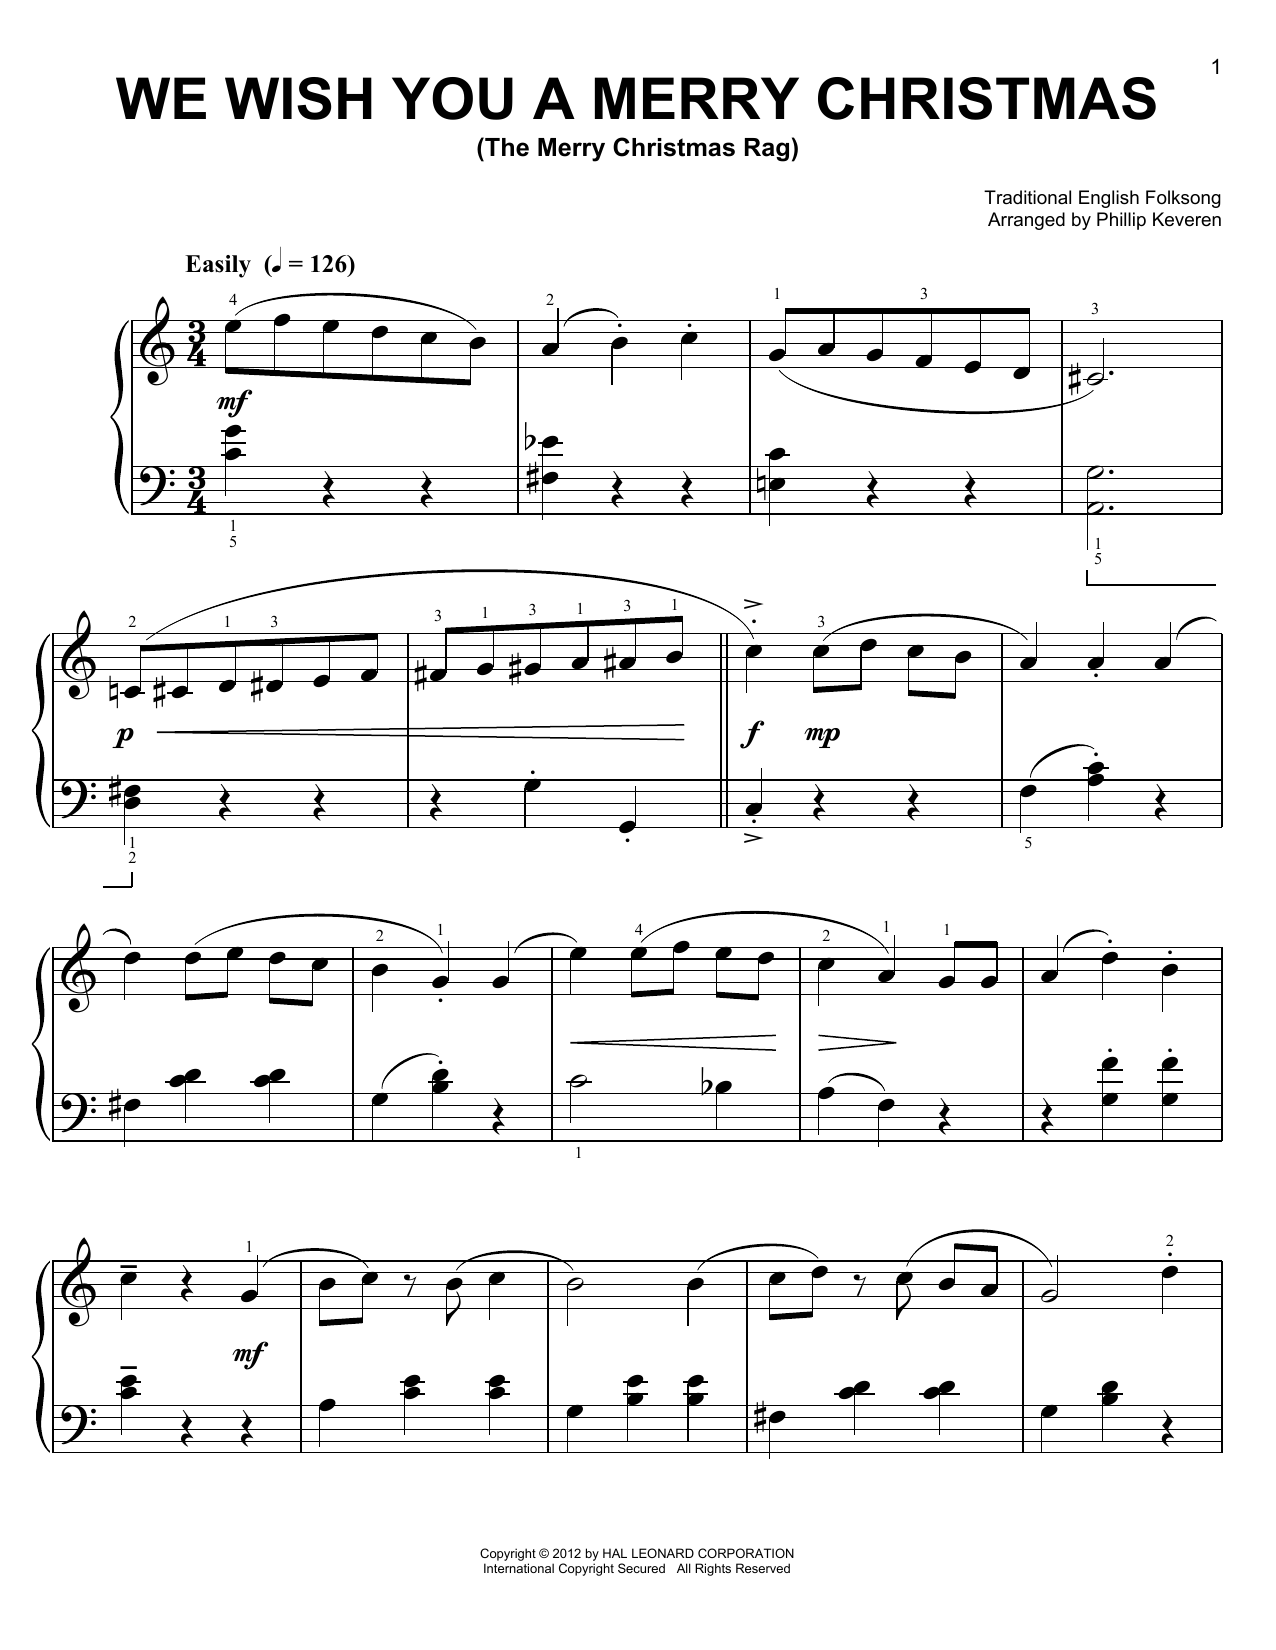 Download Traditional English Folksong We Wish You A Merry Christmas [Ragtime Sheet Music